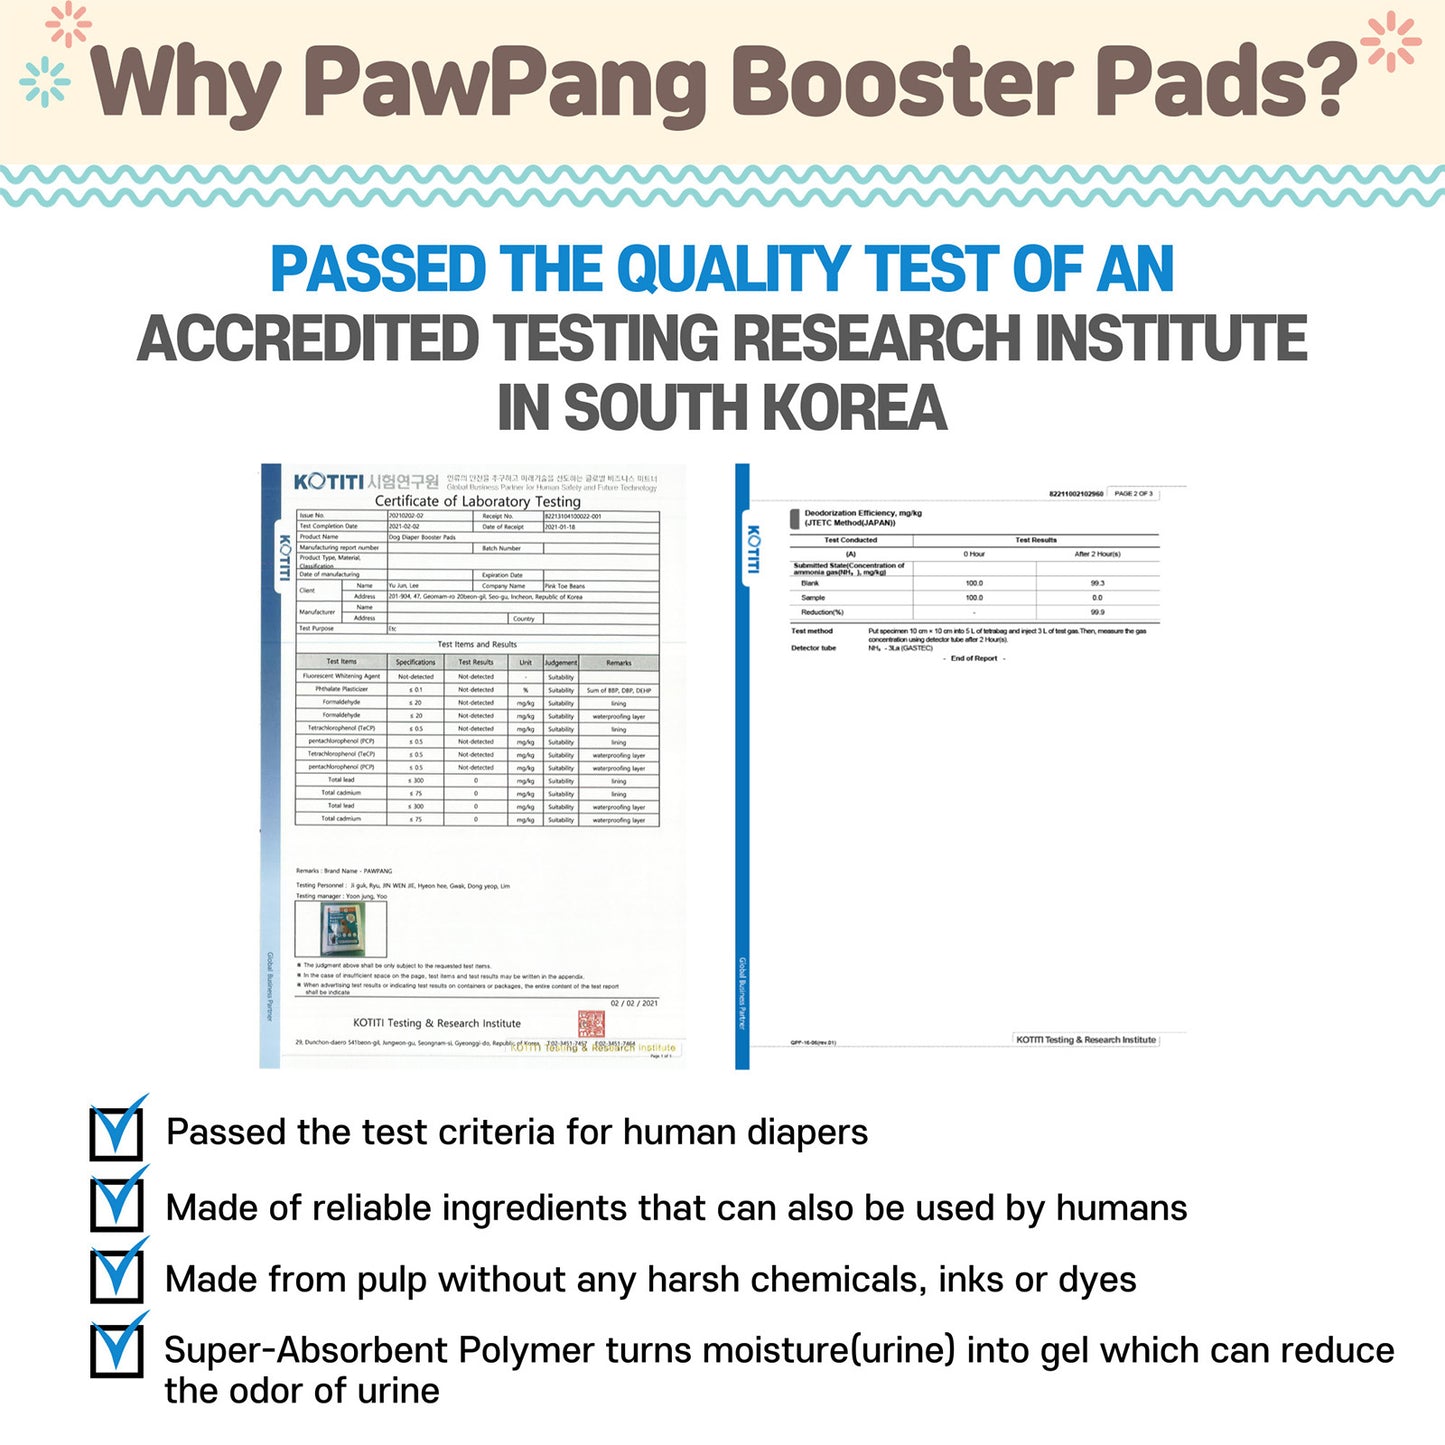 PawPang L Dog Wrap Reusable Male + 10 Ct M Diaper Booster Pads Disposable